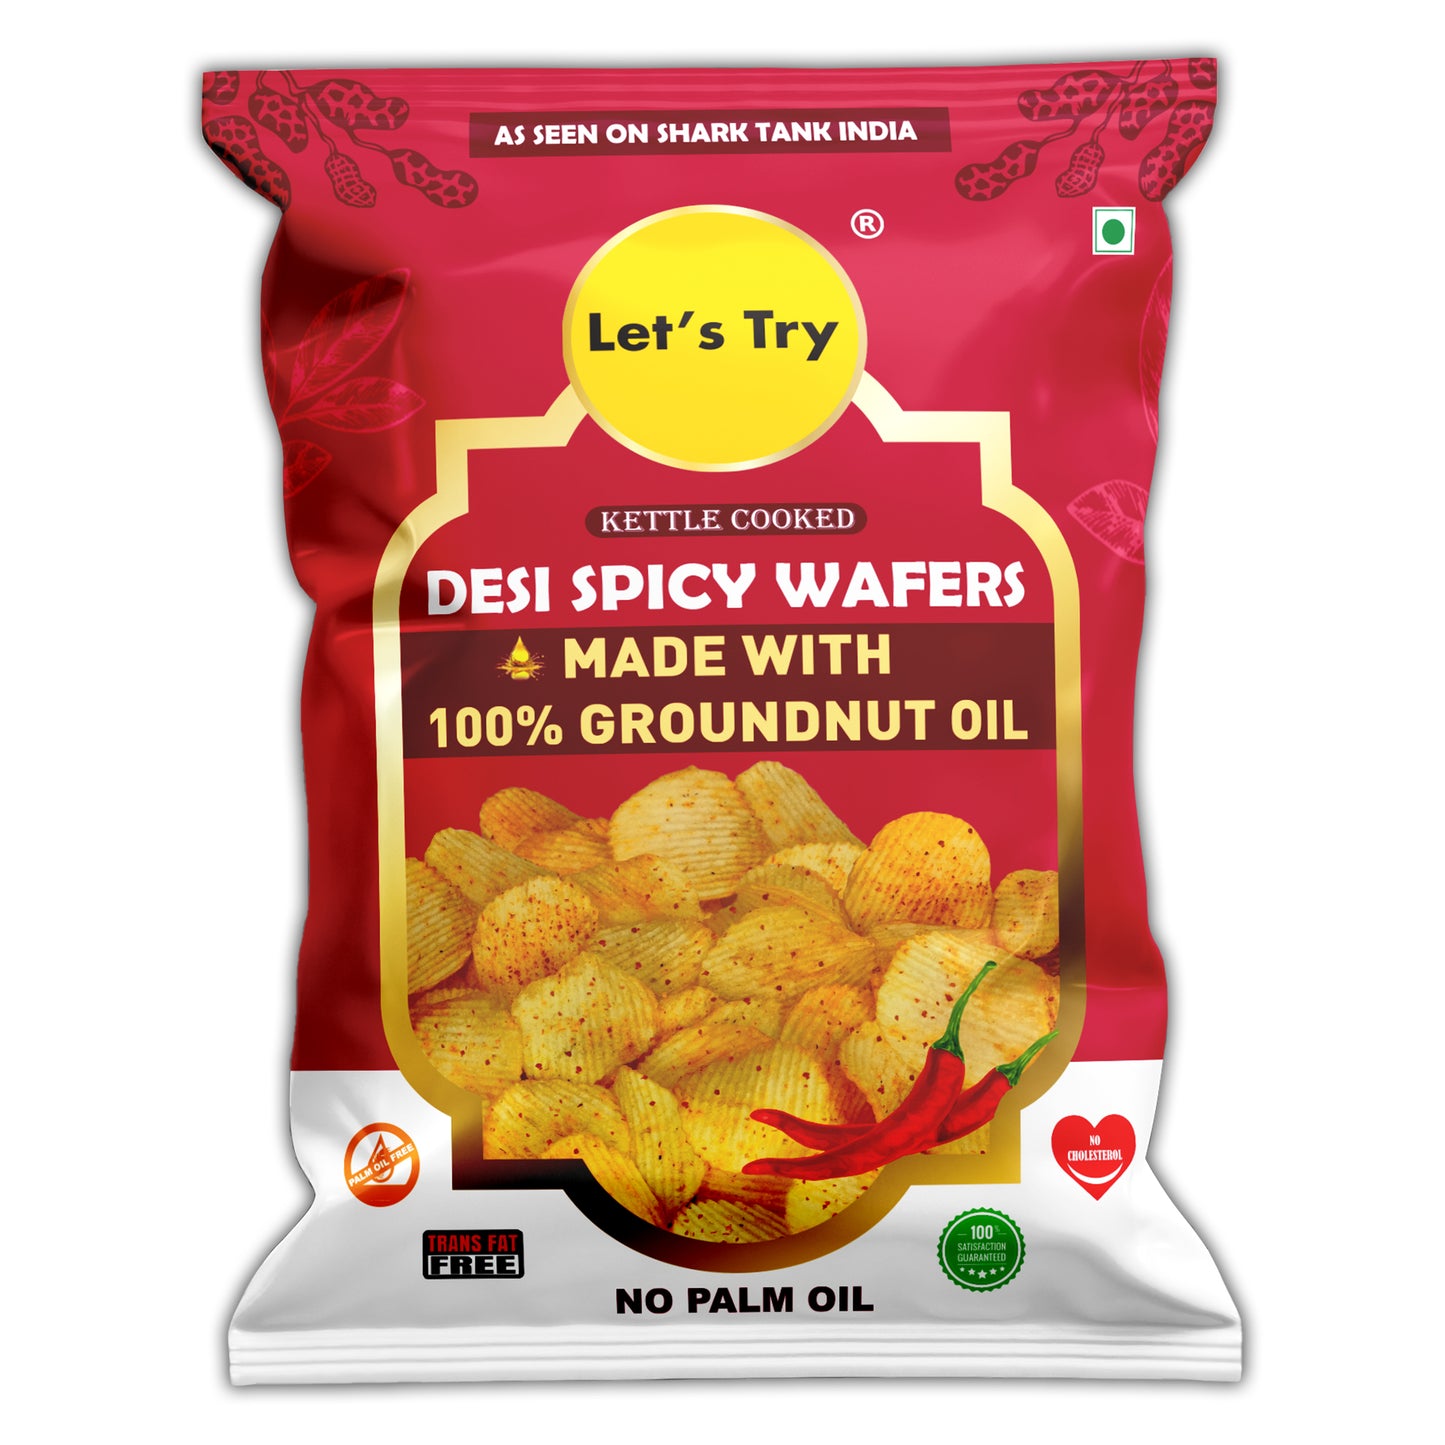 Let's Try Desi Spicy Wafers